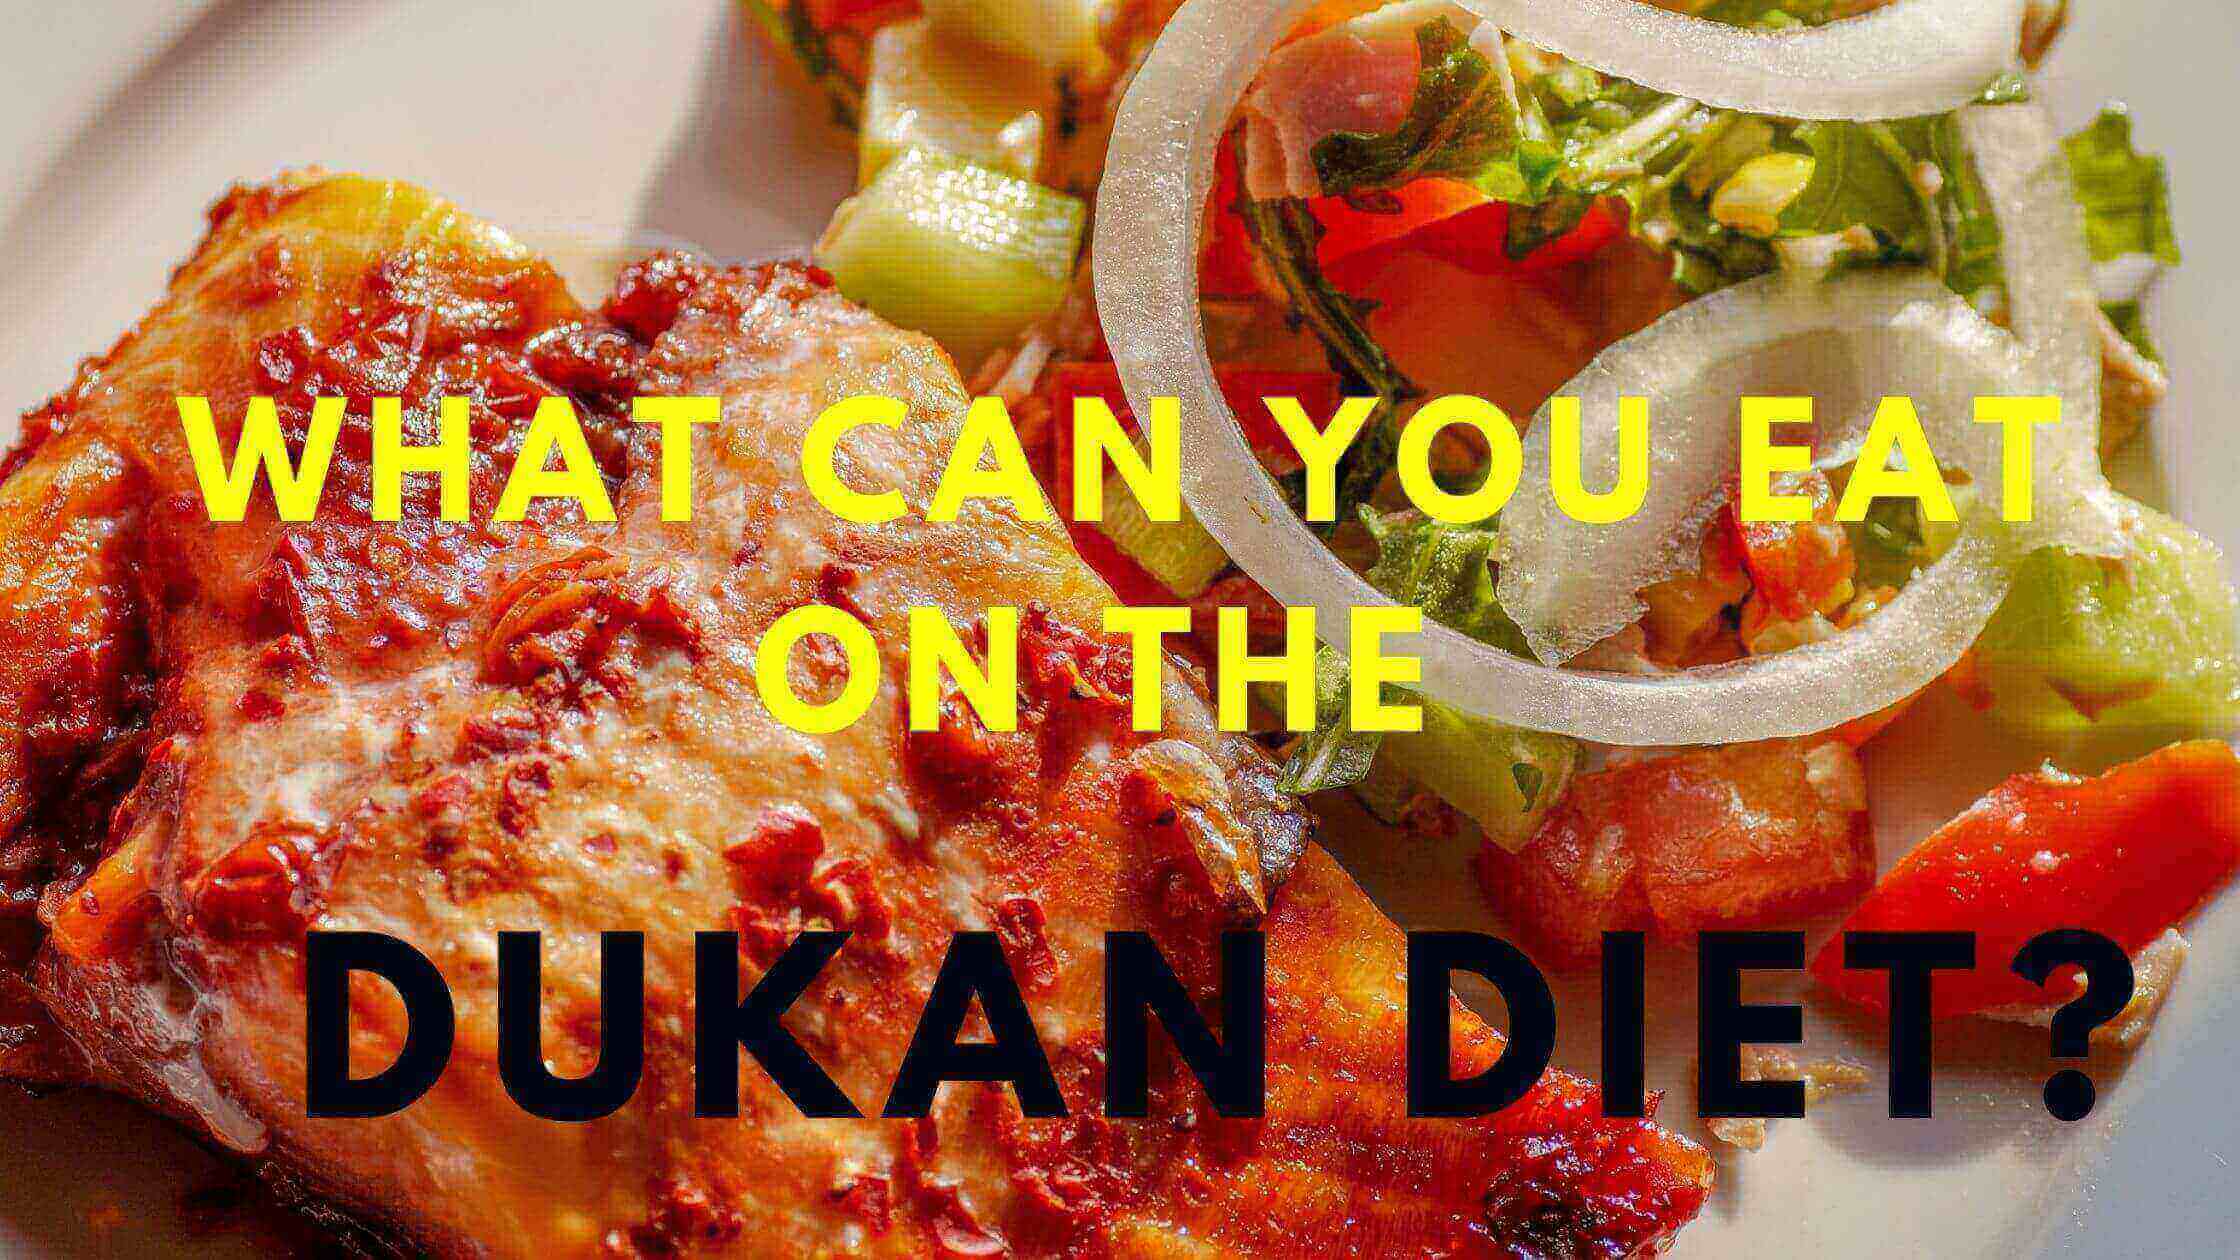 What can you eat on the dukan diet?